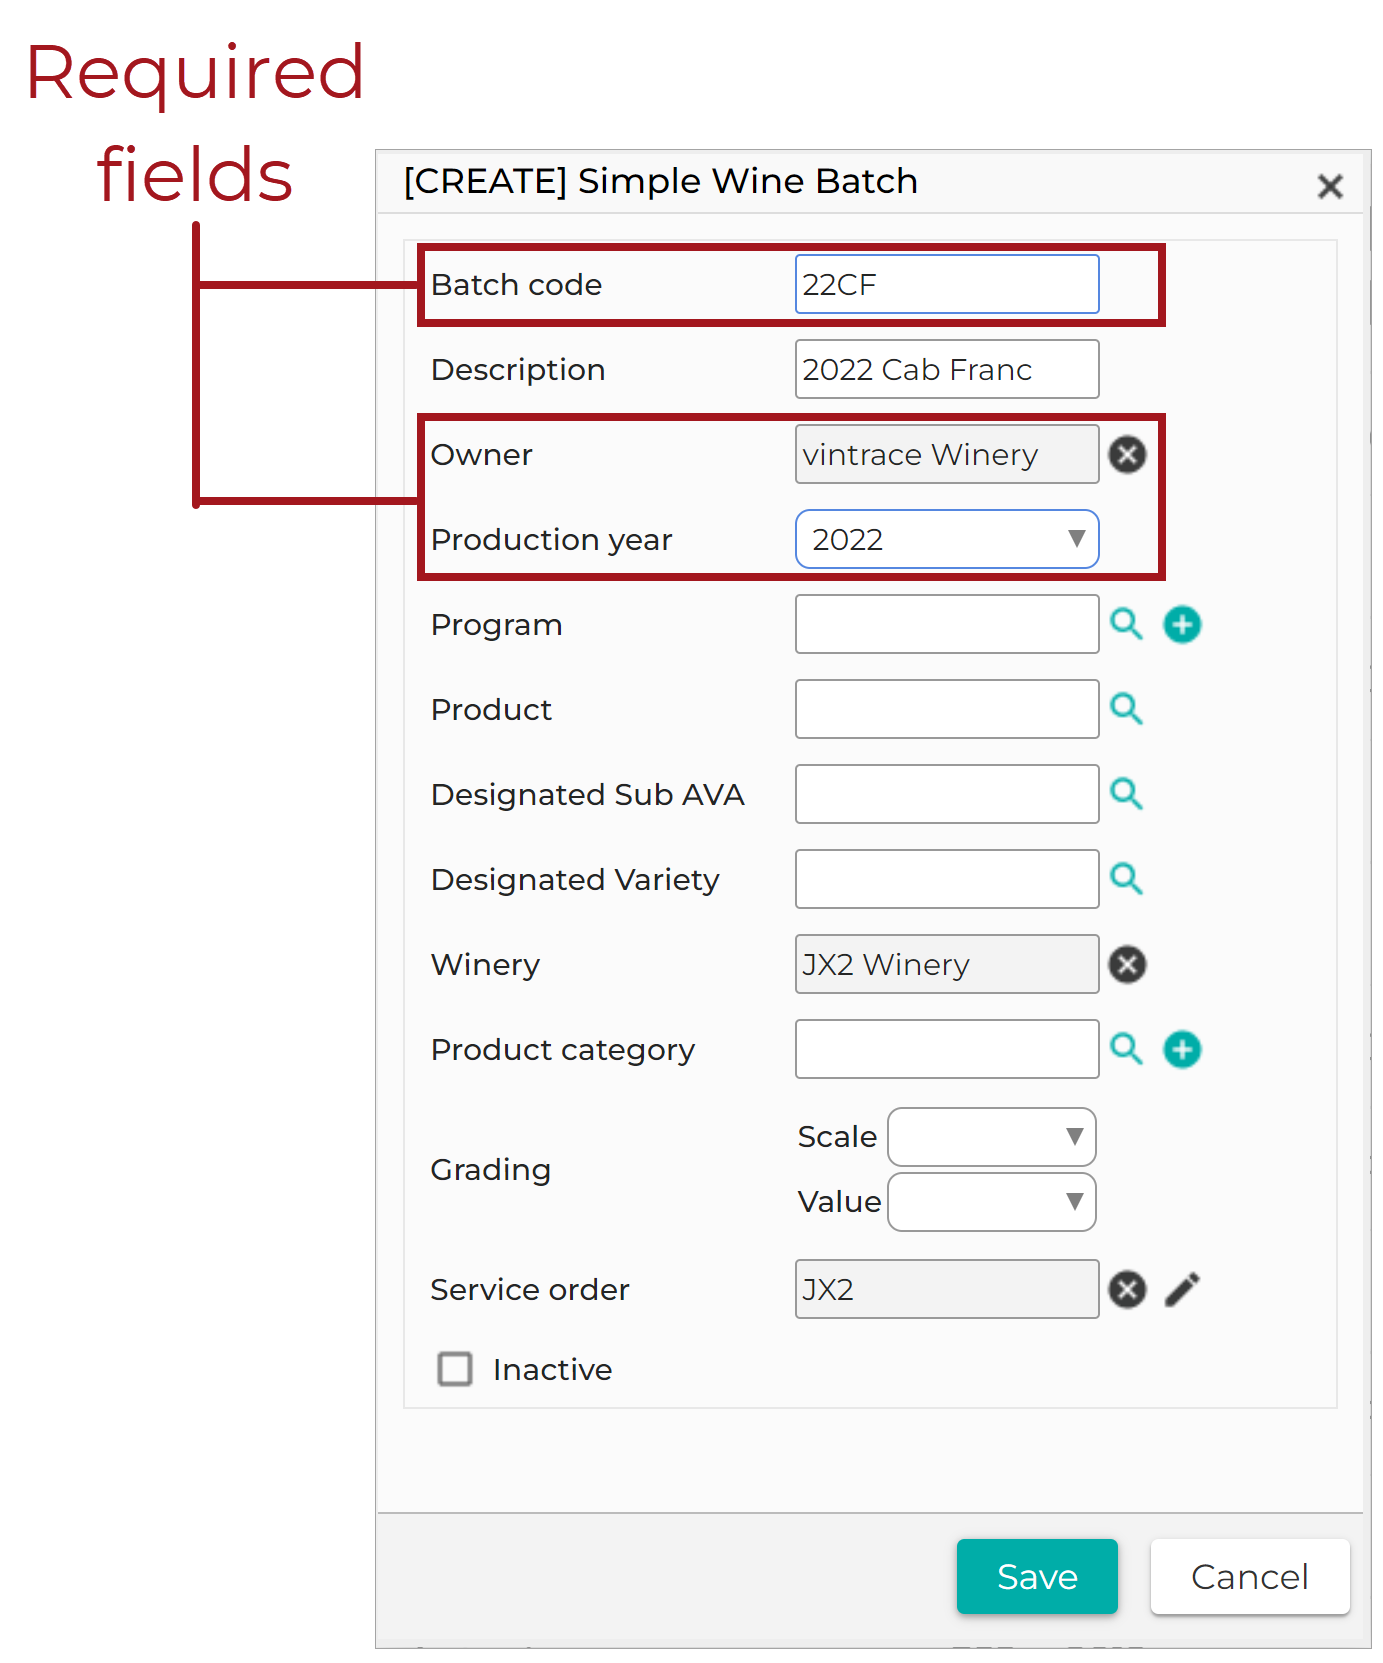 Create_Simple_Wine_Batch_-_Required_Fields_20221020.png